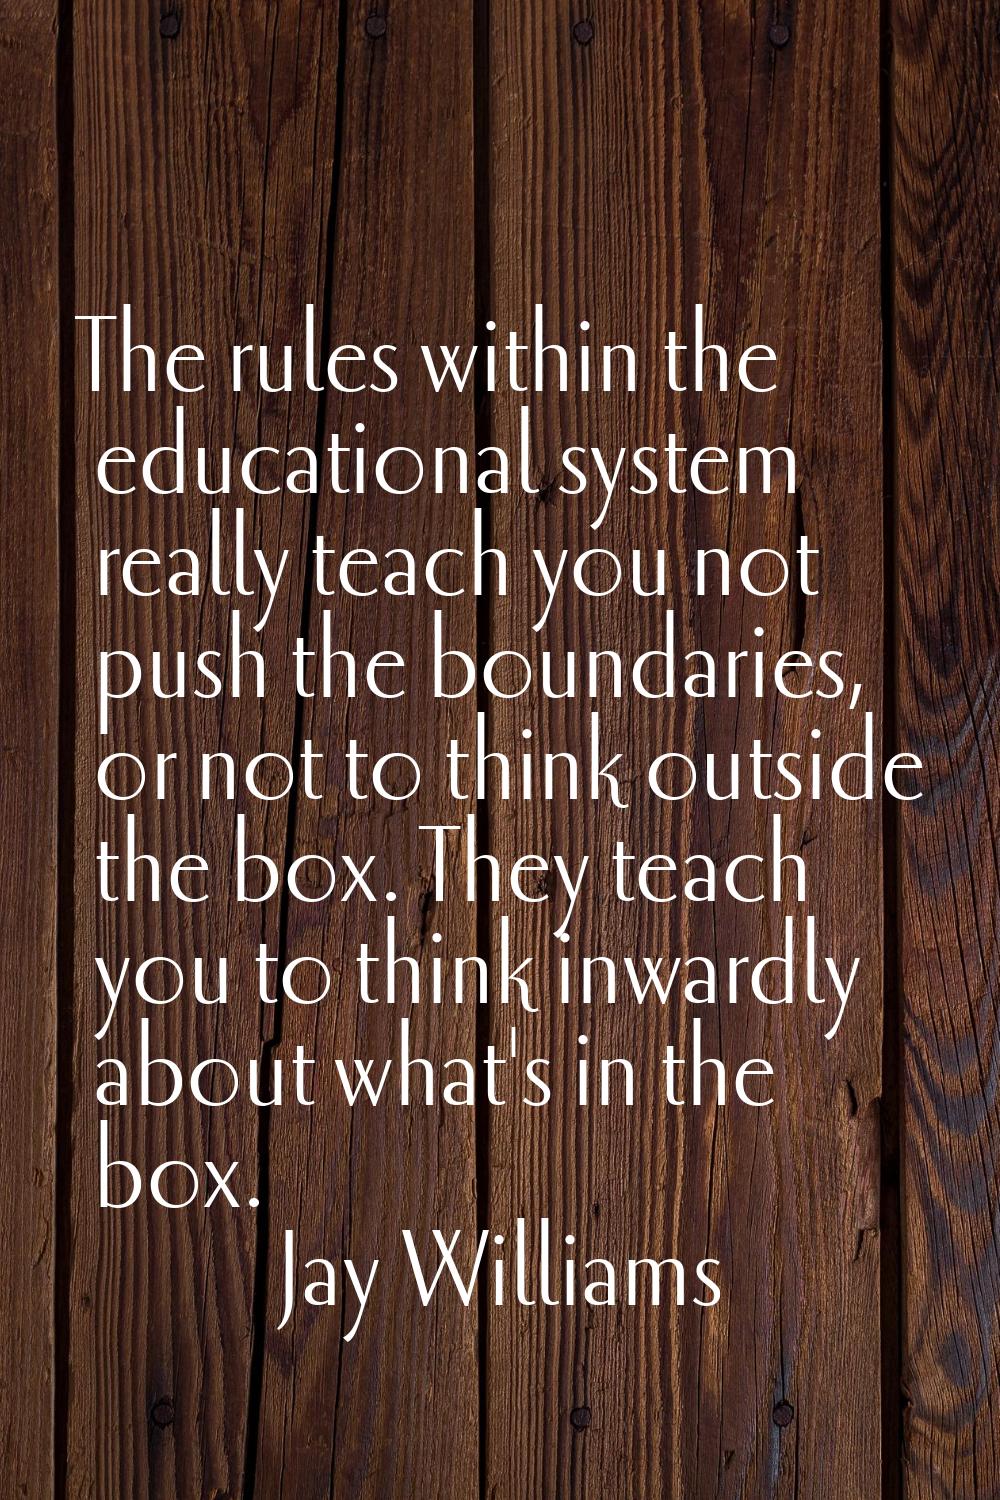 The rules within the educational system really teach you not push the boundaries, or not to think o